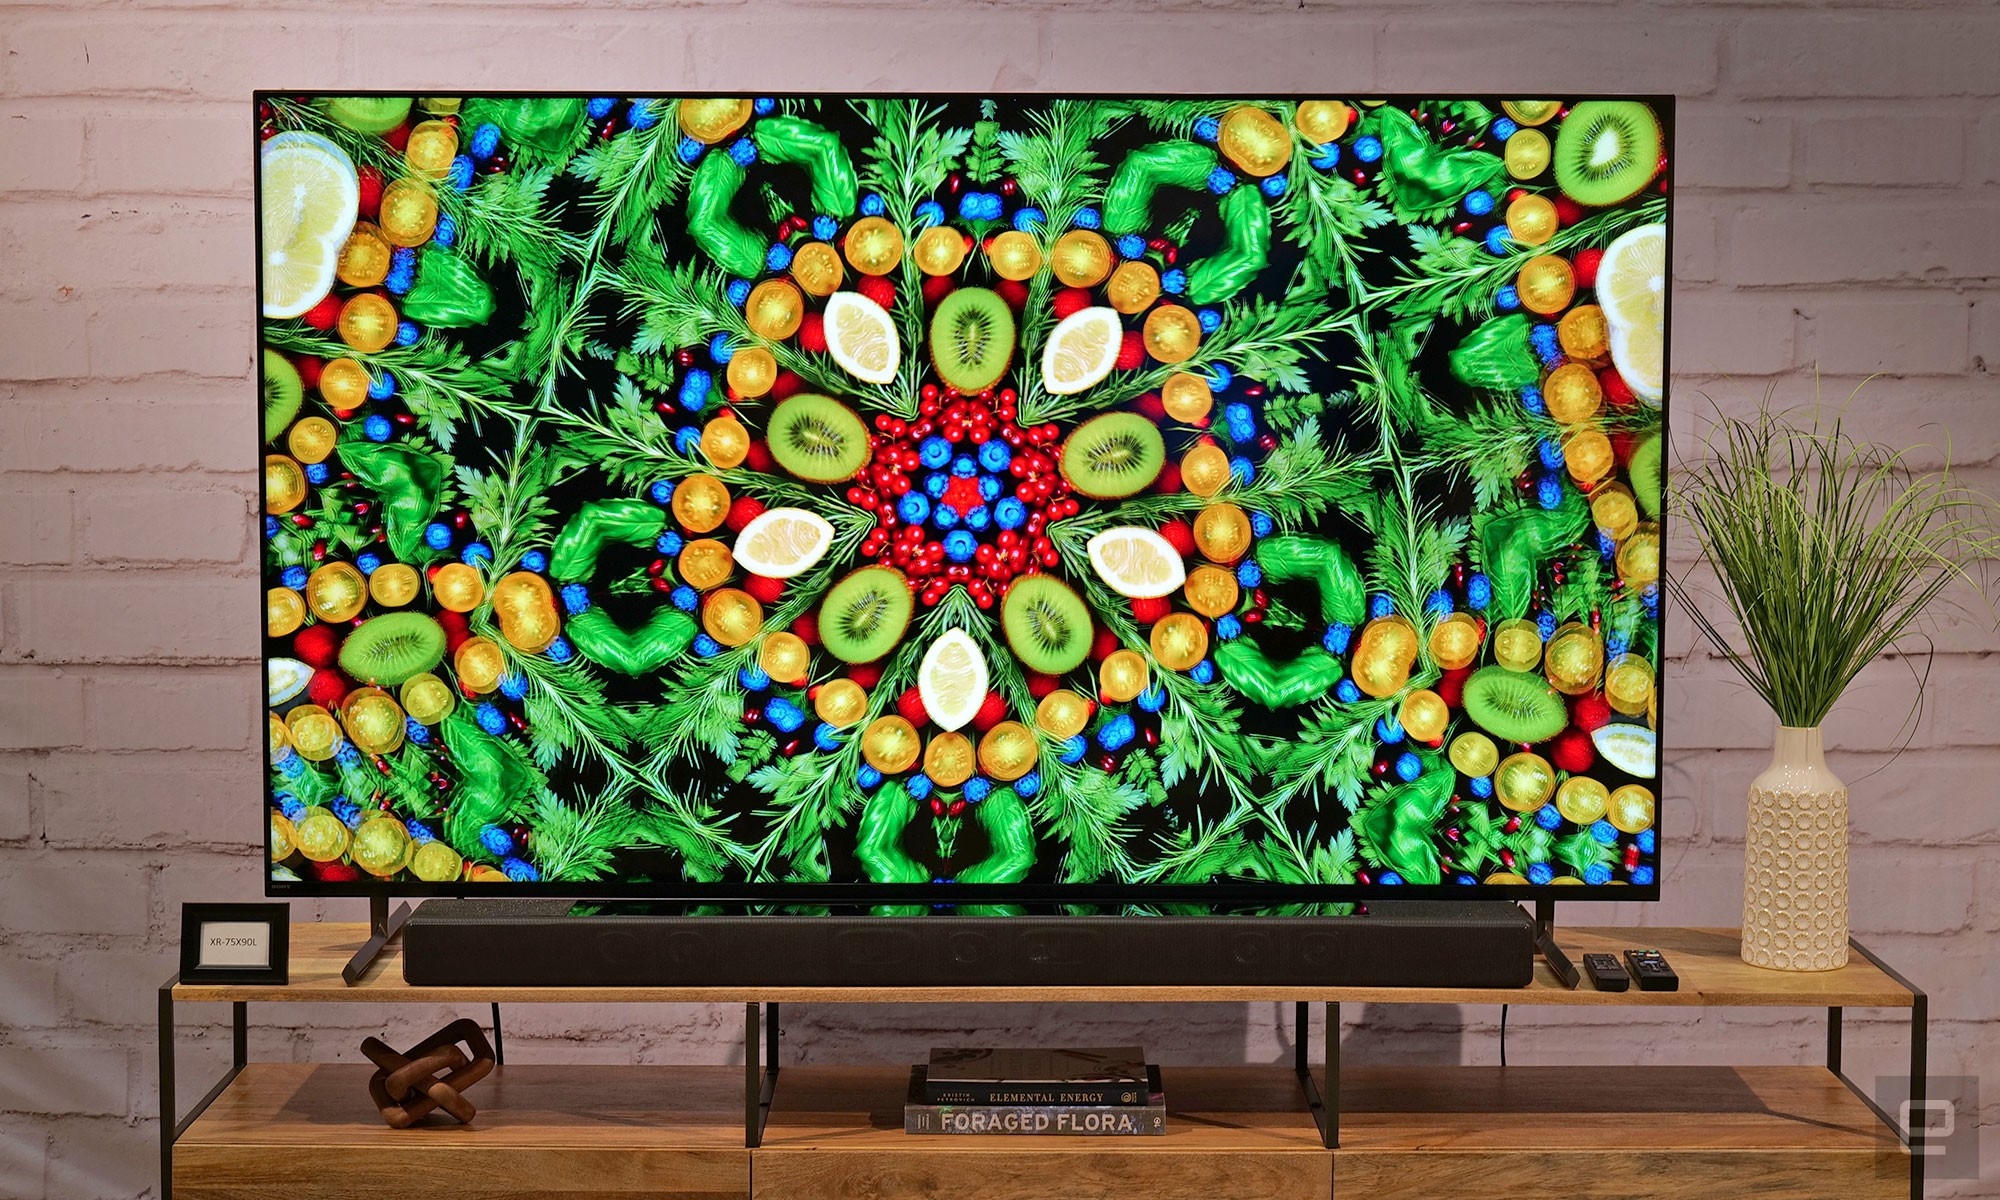 Sony 2023 Bravia XR TV hands-on: Bigger, brighter and even better looking | DeviceDaily.com